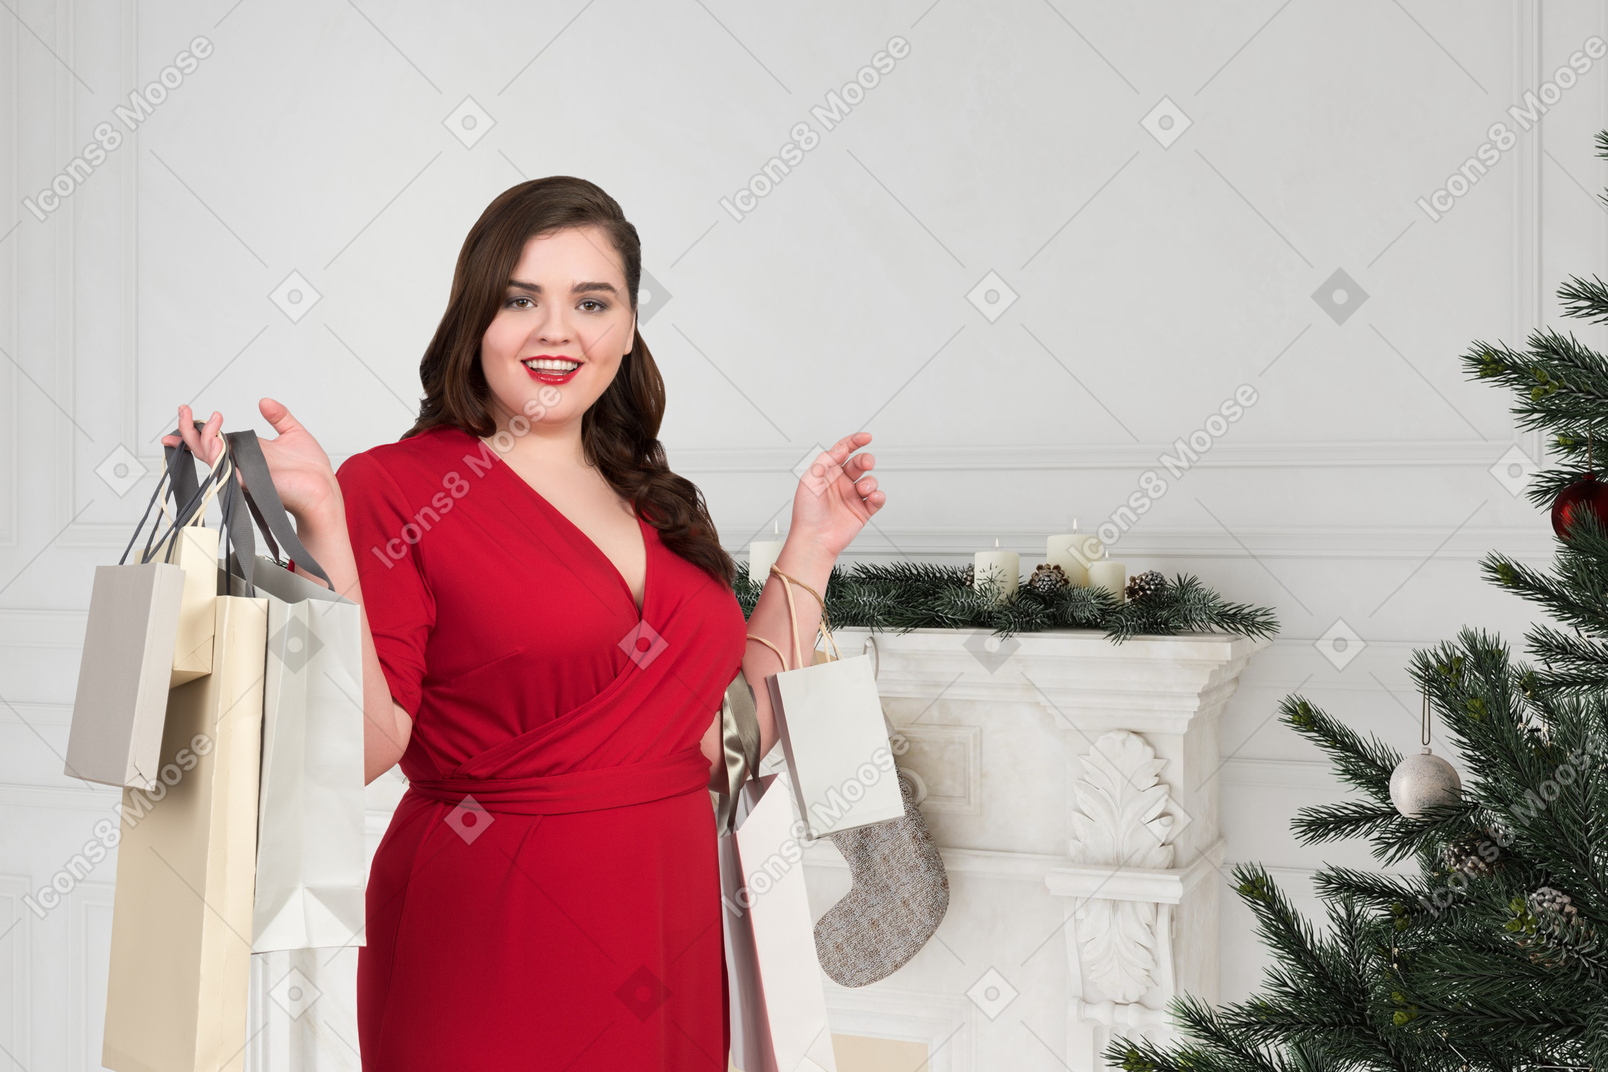 Plump woman after christmas shopping